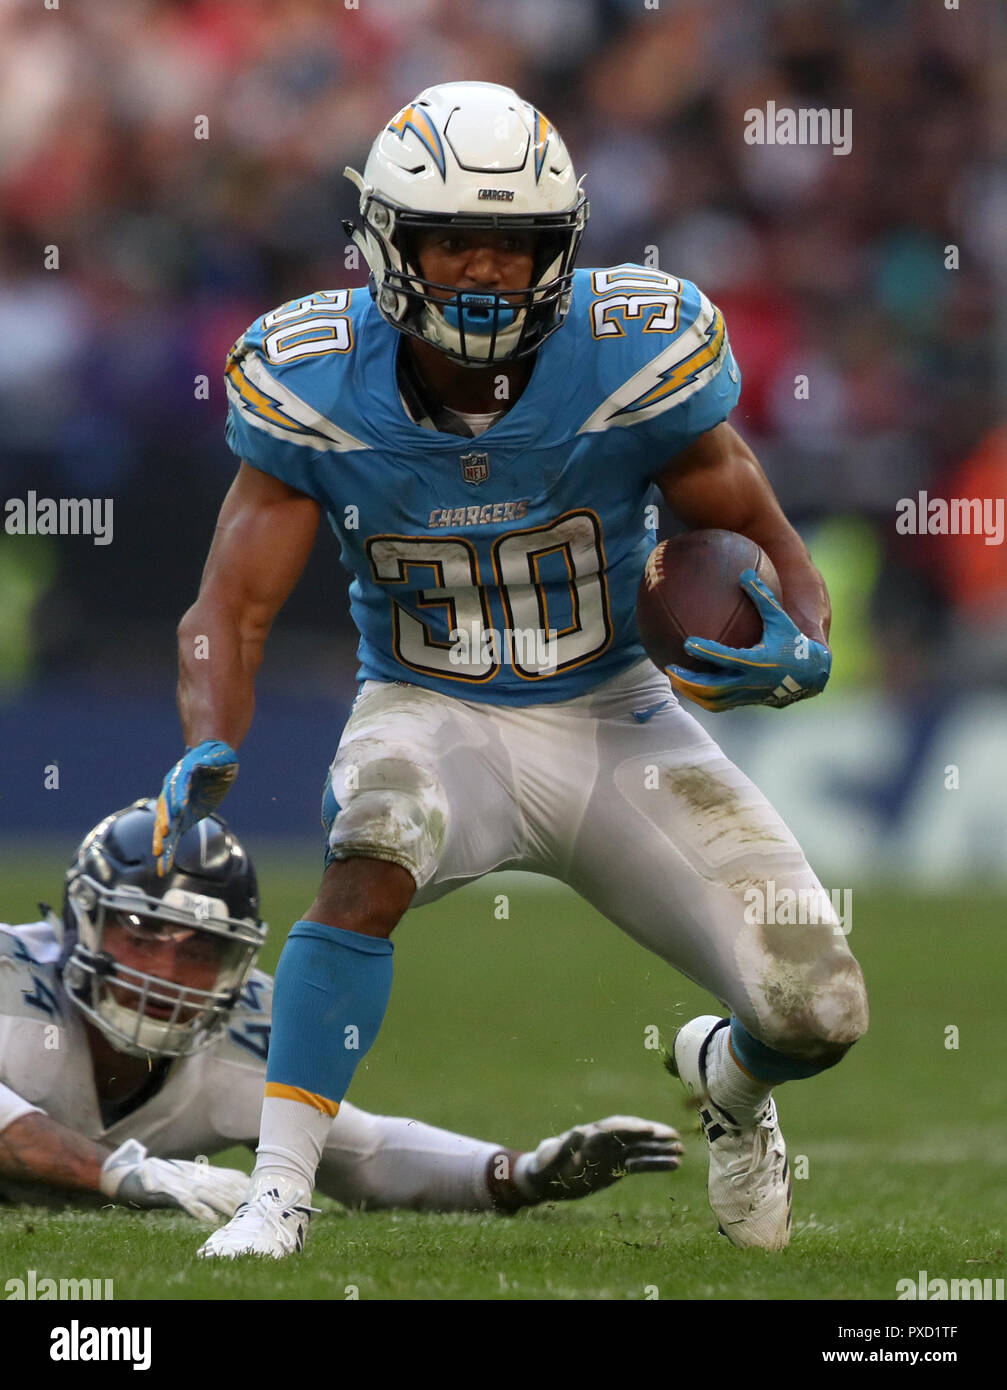 LA Chargers's Austin Ekeler in action during the International Series NFL match at Wembley Stadium, London. PRESS ASSOCIATION Photo. Picture date: Sunday October 21, 2018. See PA story GRIDIRON London. Photo credit should read: Simon Cooper/PA Wire. Stock Photo